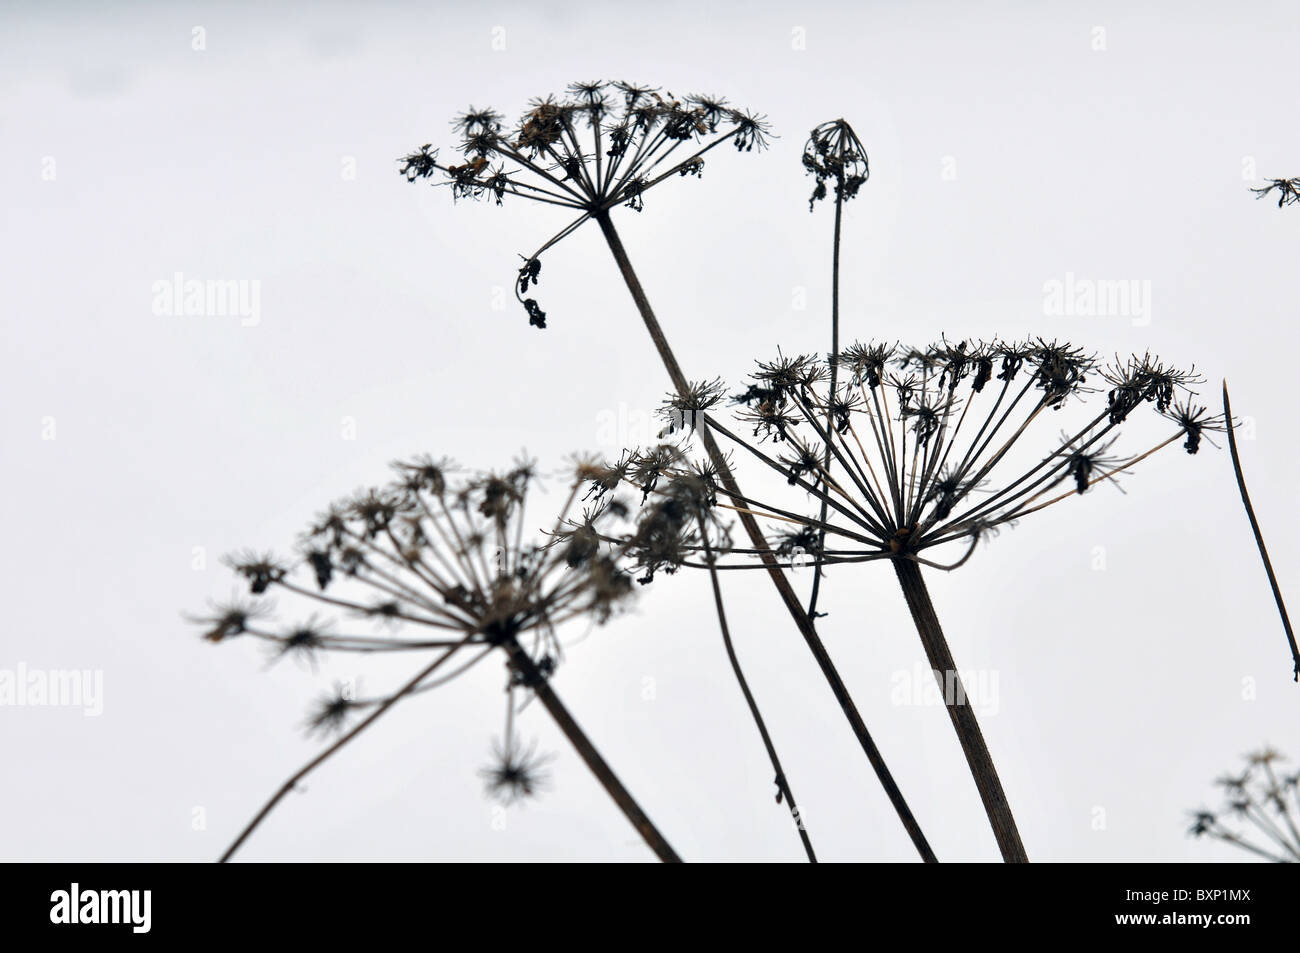 Cow Parsley in winter against snowy background Stock Photo